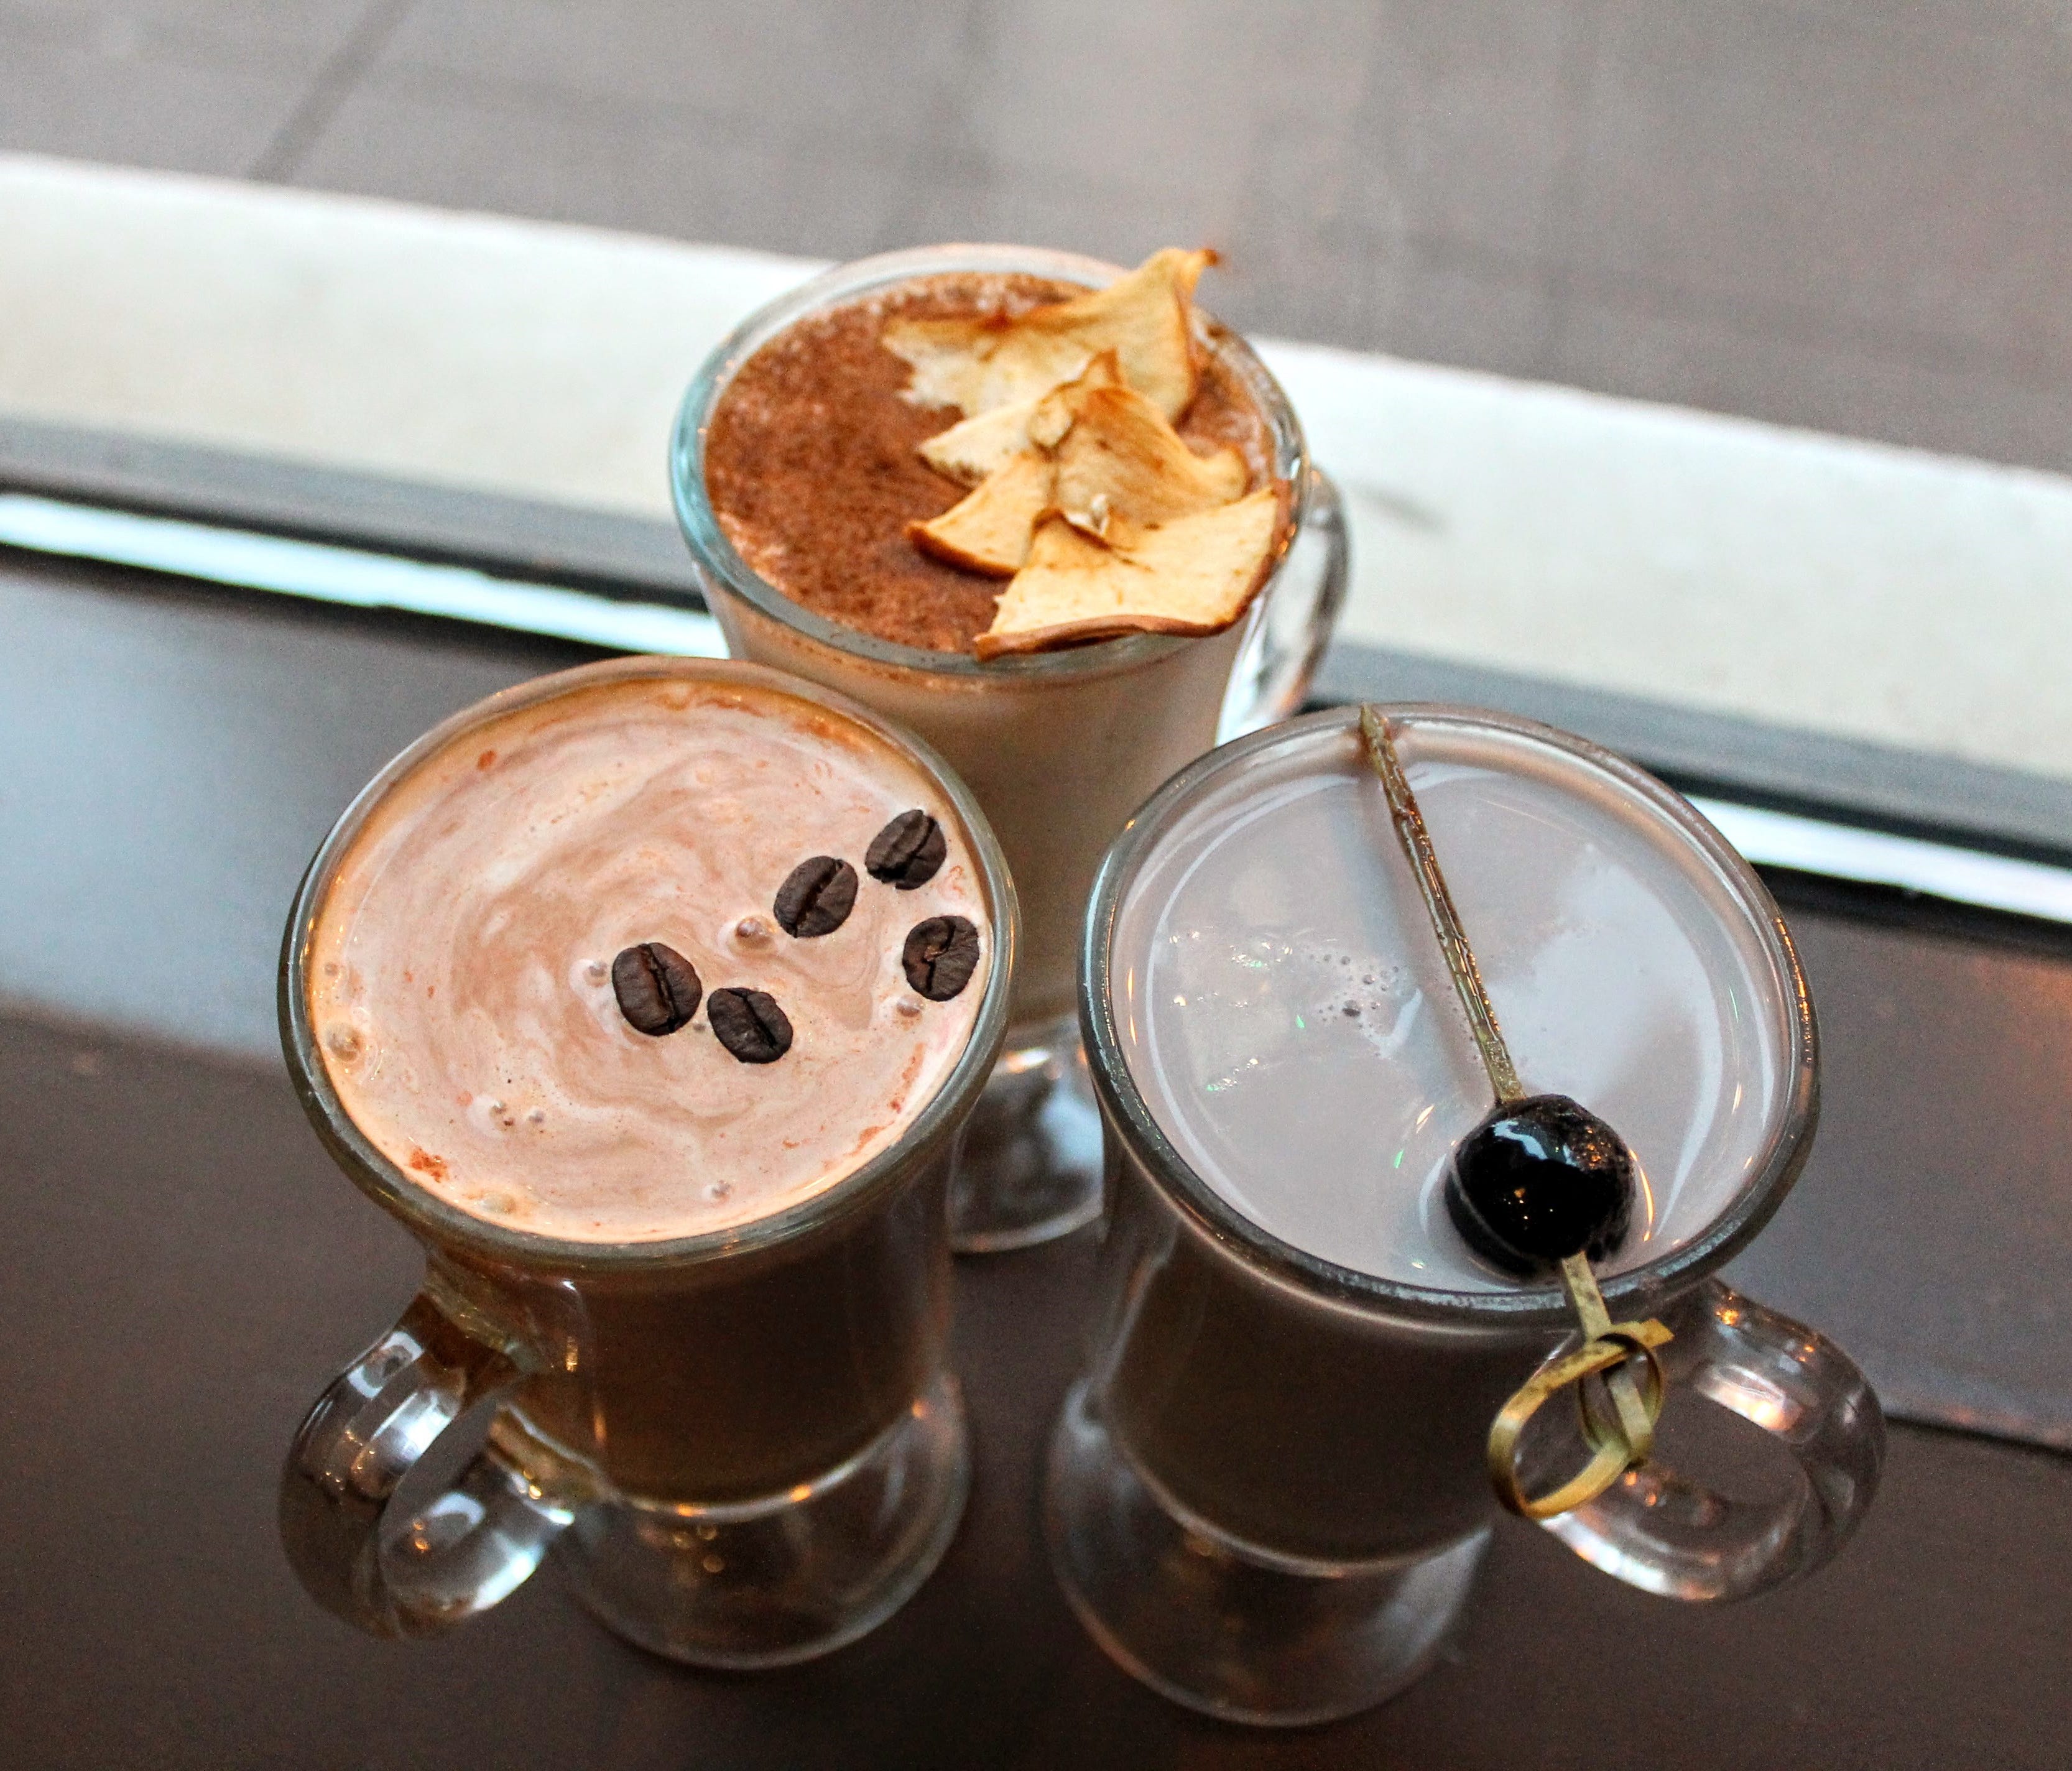 At the Renaissance Chicago Downtown Hotel, Staytion offers three eggnog variations: Apple Cinnamon, Espresso (hot buttered rum plus espresso), and Ube (a purple version inspired by mixologist Kevin Fahey's trip to the Philippines).